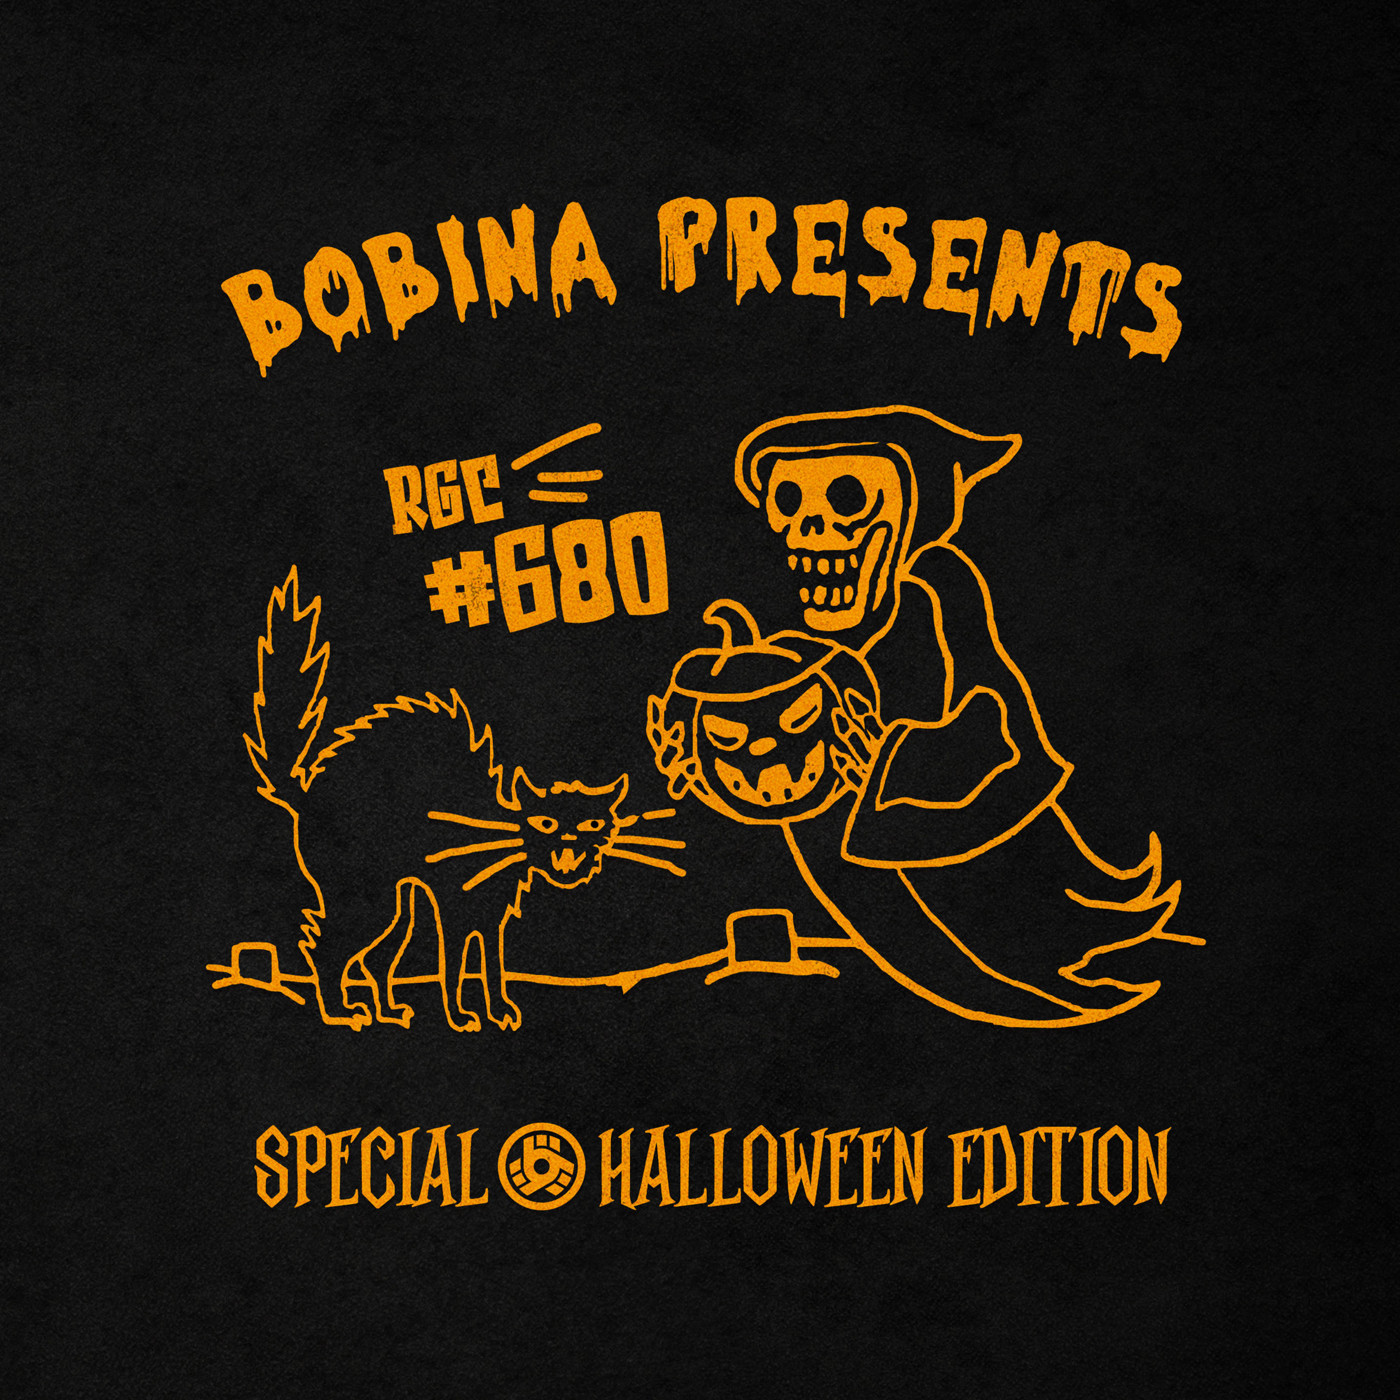 Russia Goes Clubbing (Psy Trance Halloween Edition) #680